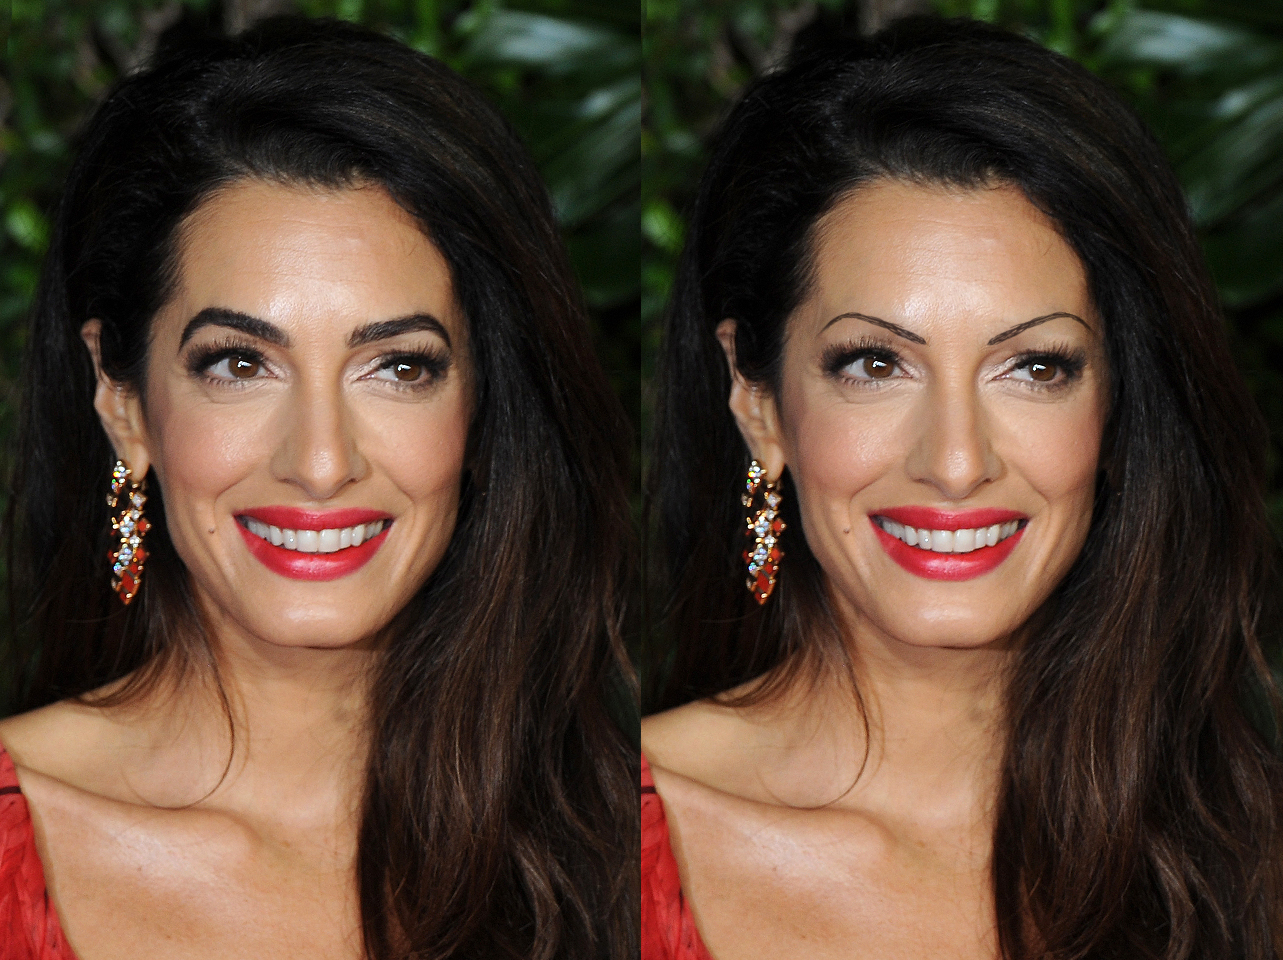 Amal Clooney's signature brows from 2022 vs digitally edited thin-brow look | Source: Getty Images